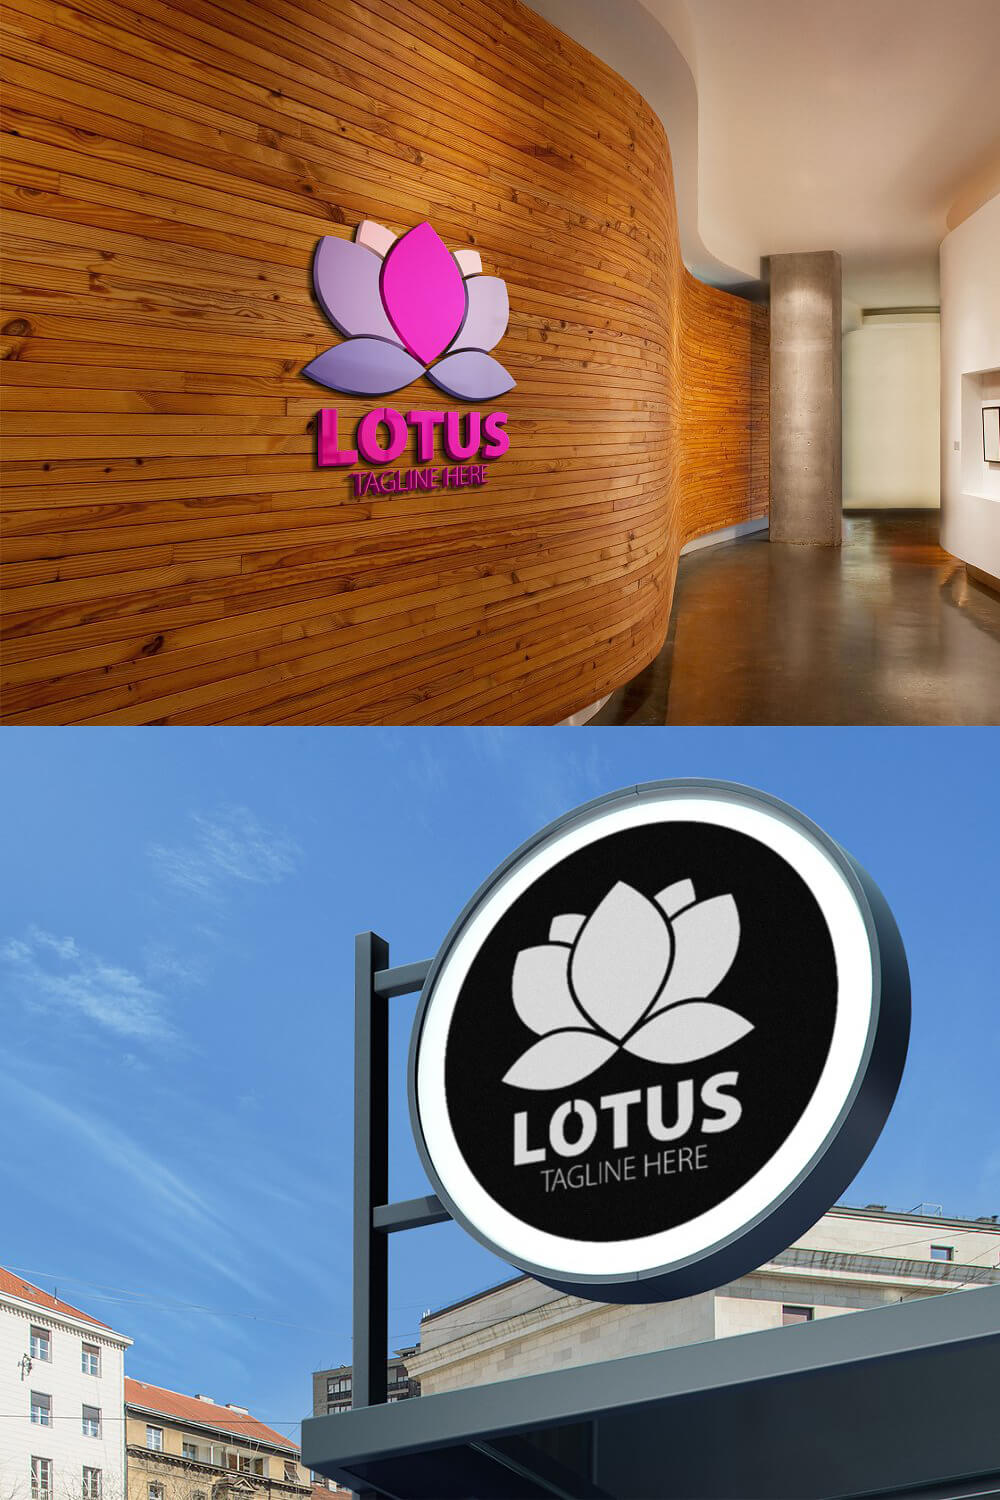 Lotus Tagline Here logos in purple and white on a plankin background and in the shape of a round stele.